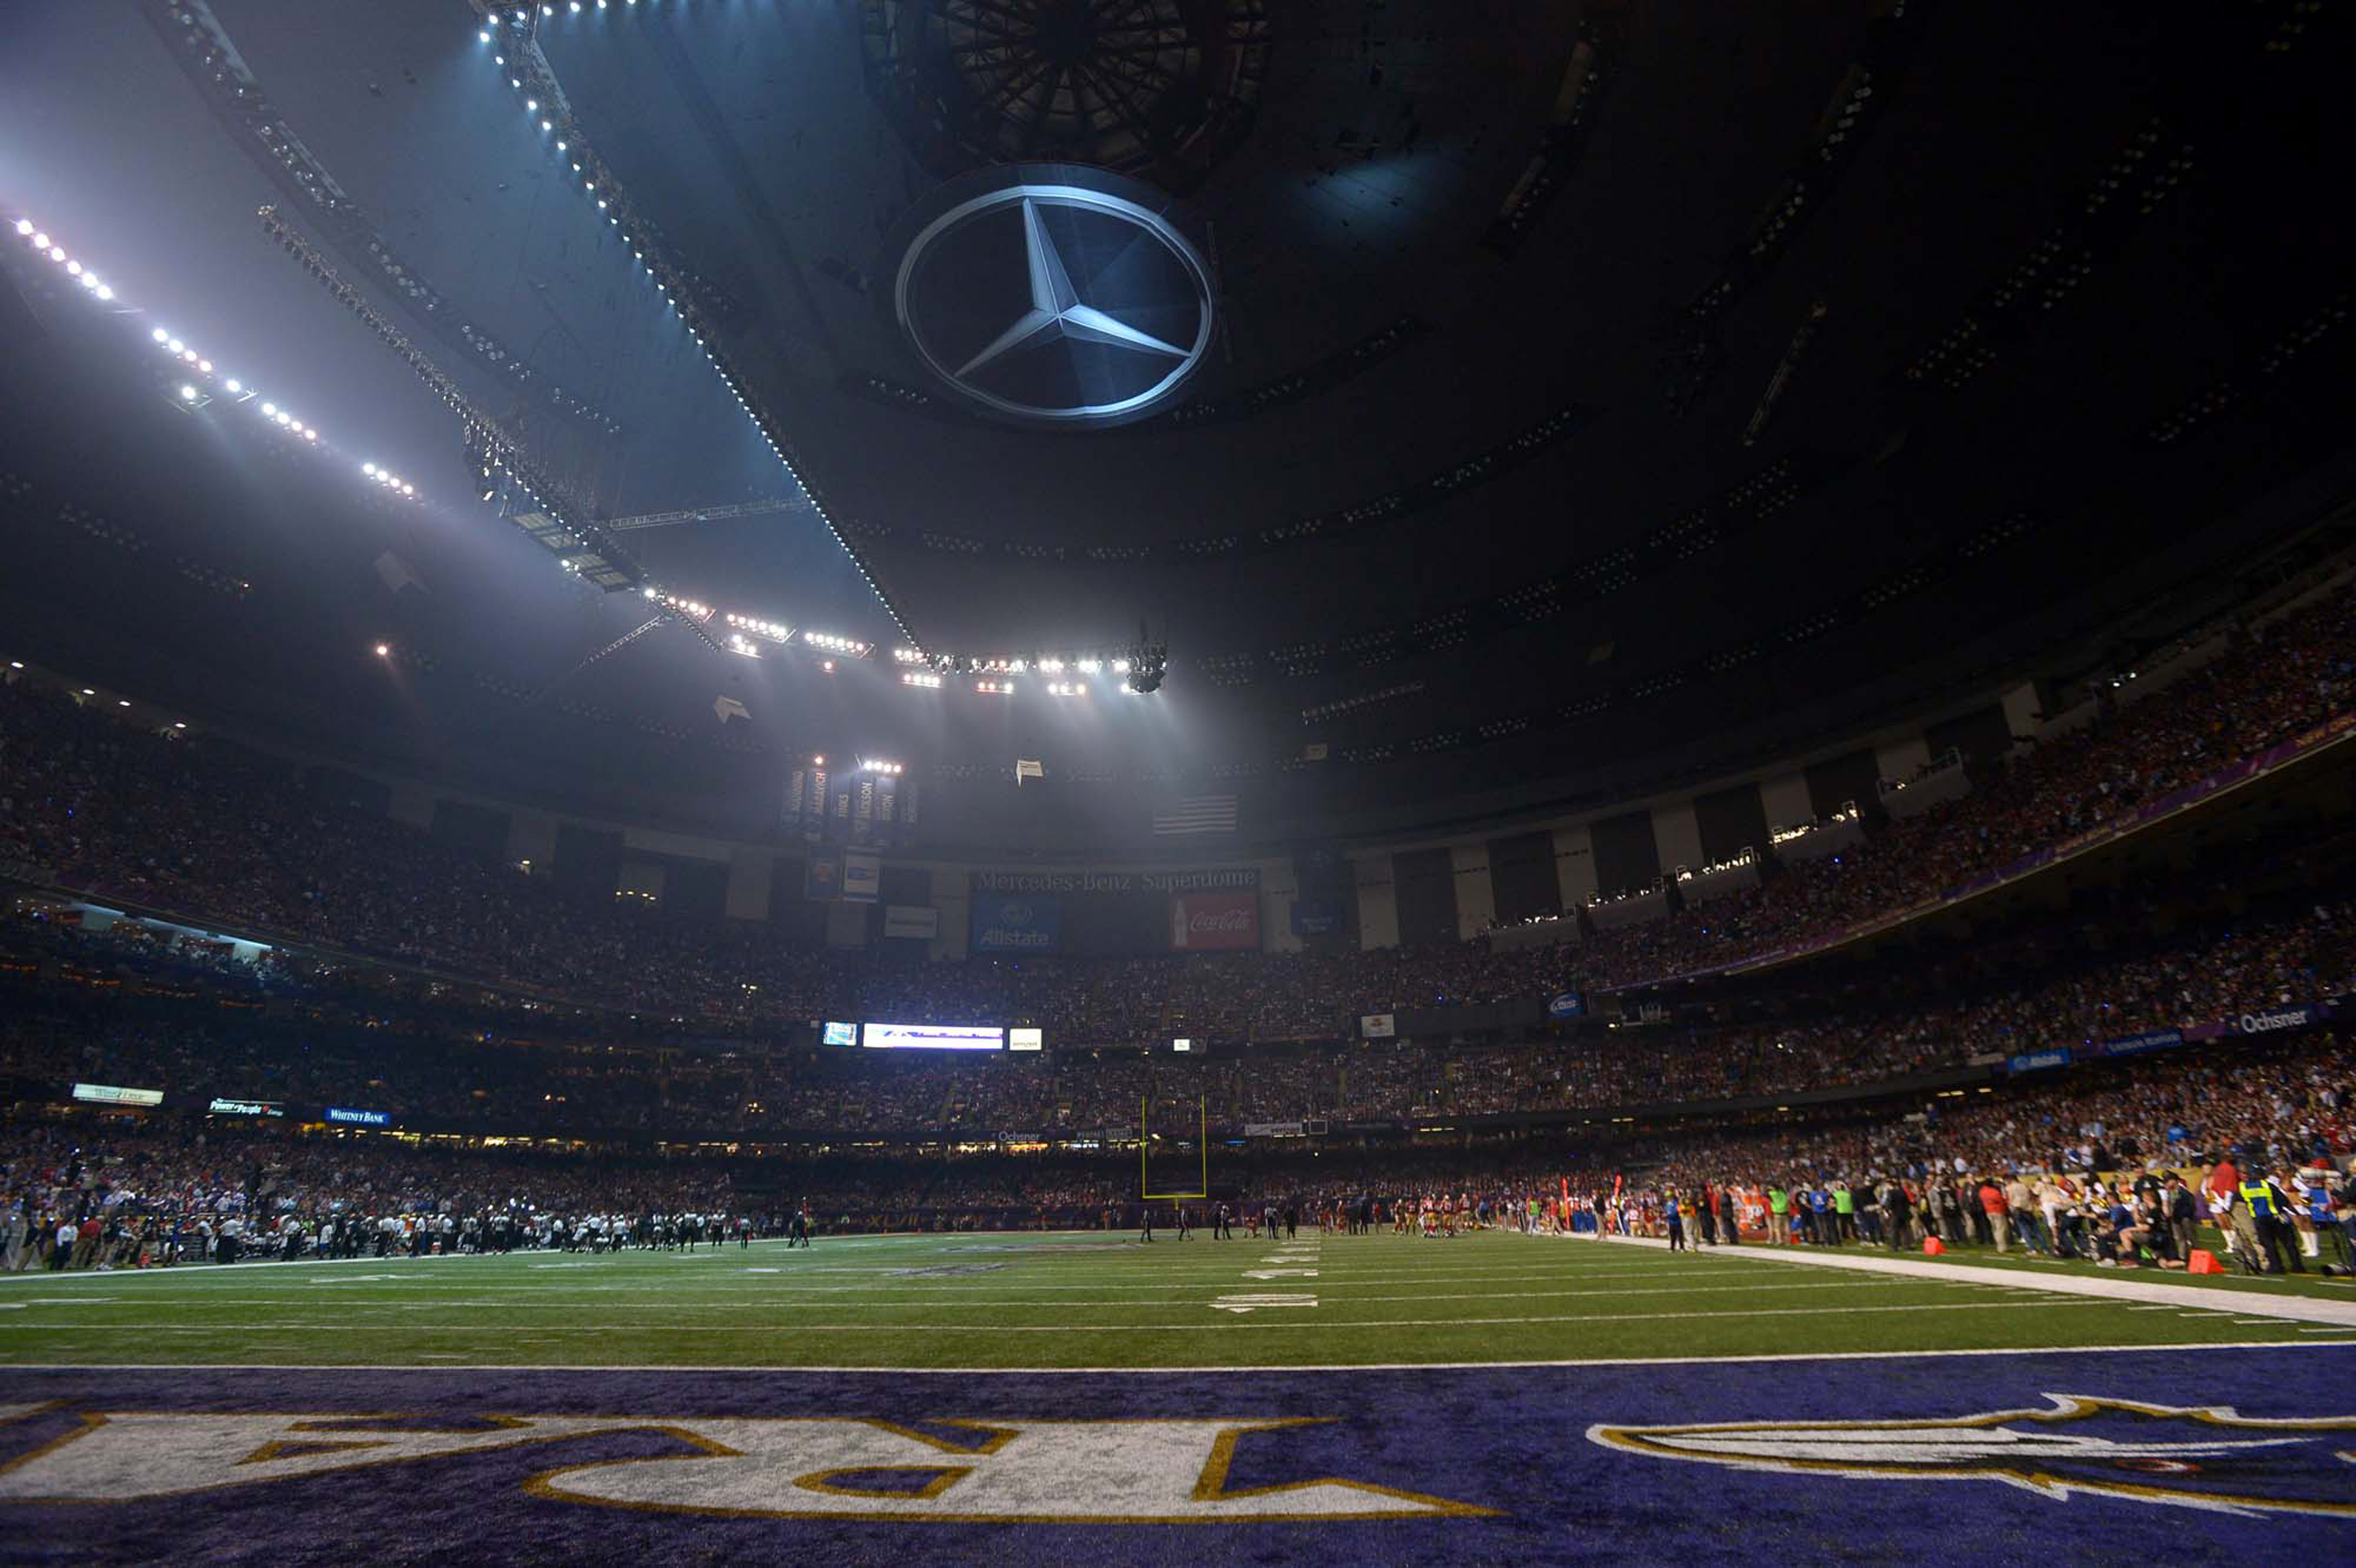 Gene Sweeney Jr. / MCT Half of the Mercedes-Benz Superdome went dark with 13:22 left in the third quarter of Super Bowl XLVII in New Orleans.